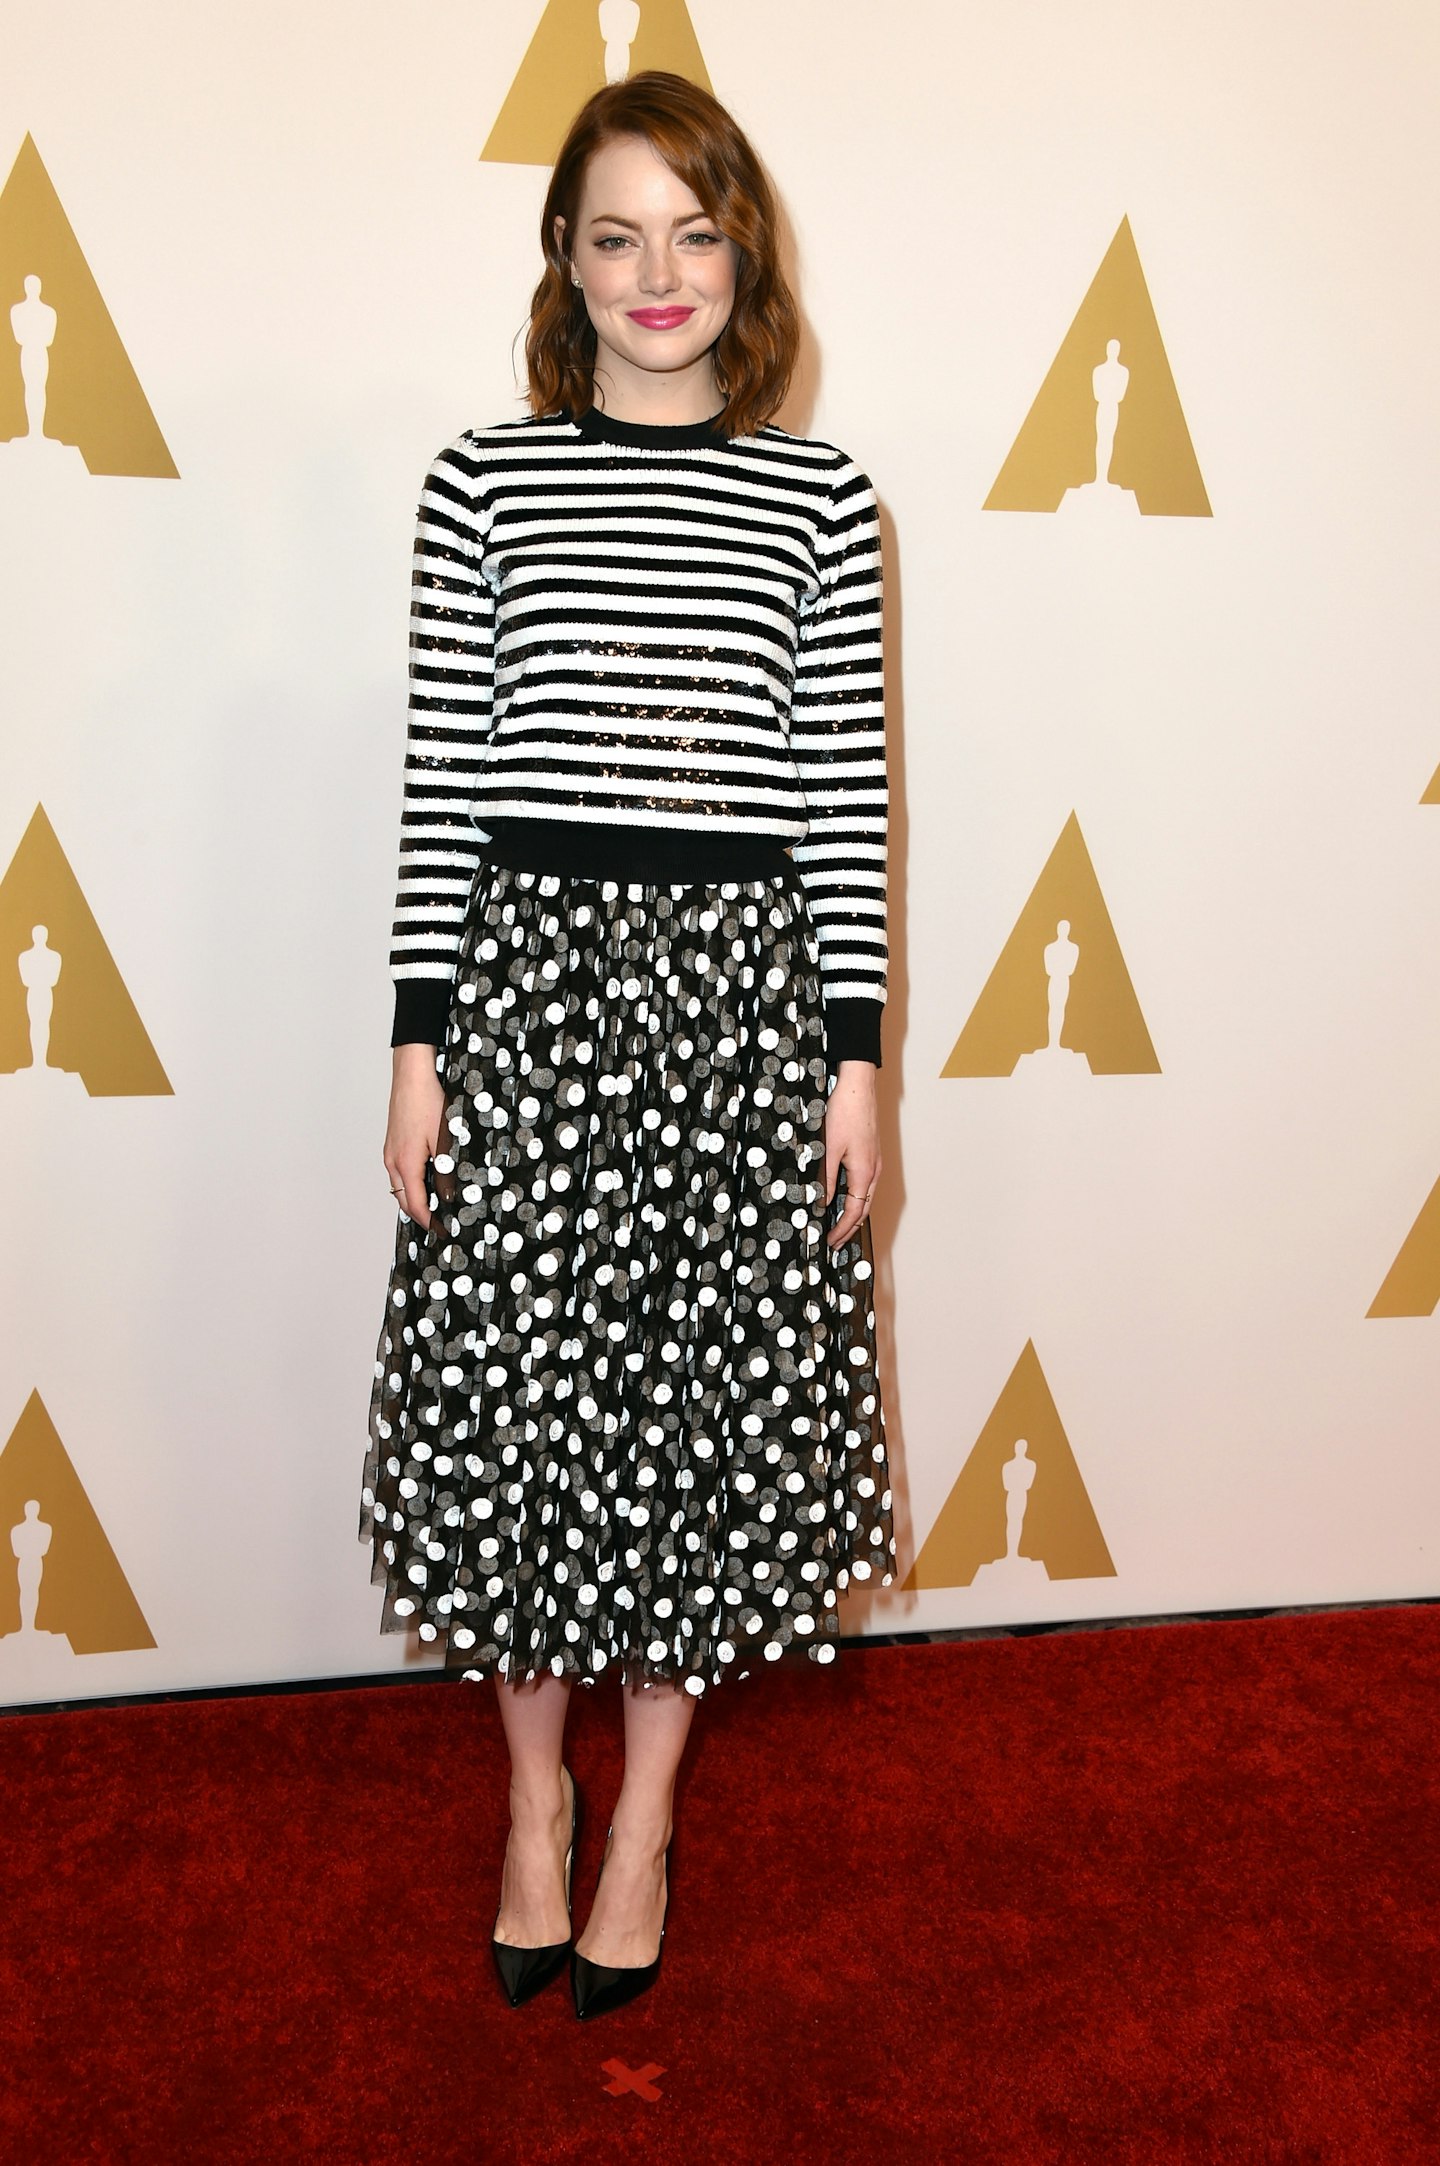 Emma Stone's Oscars Pantsuit Completely Stood Out on the Red Carpet